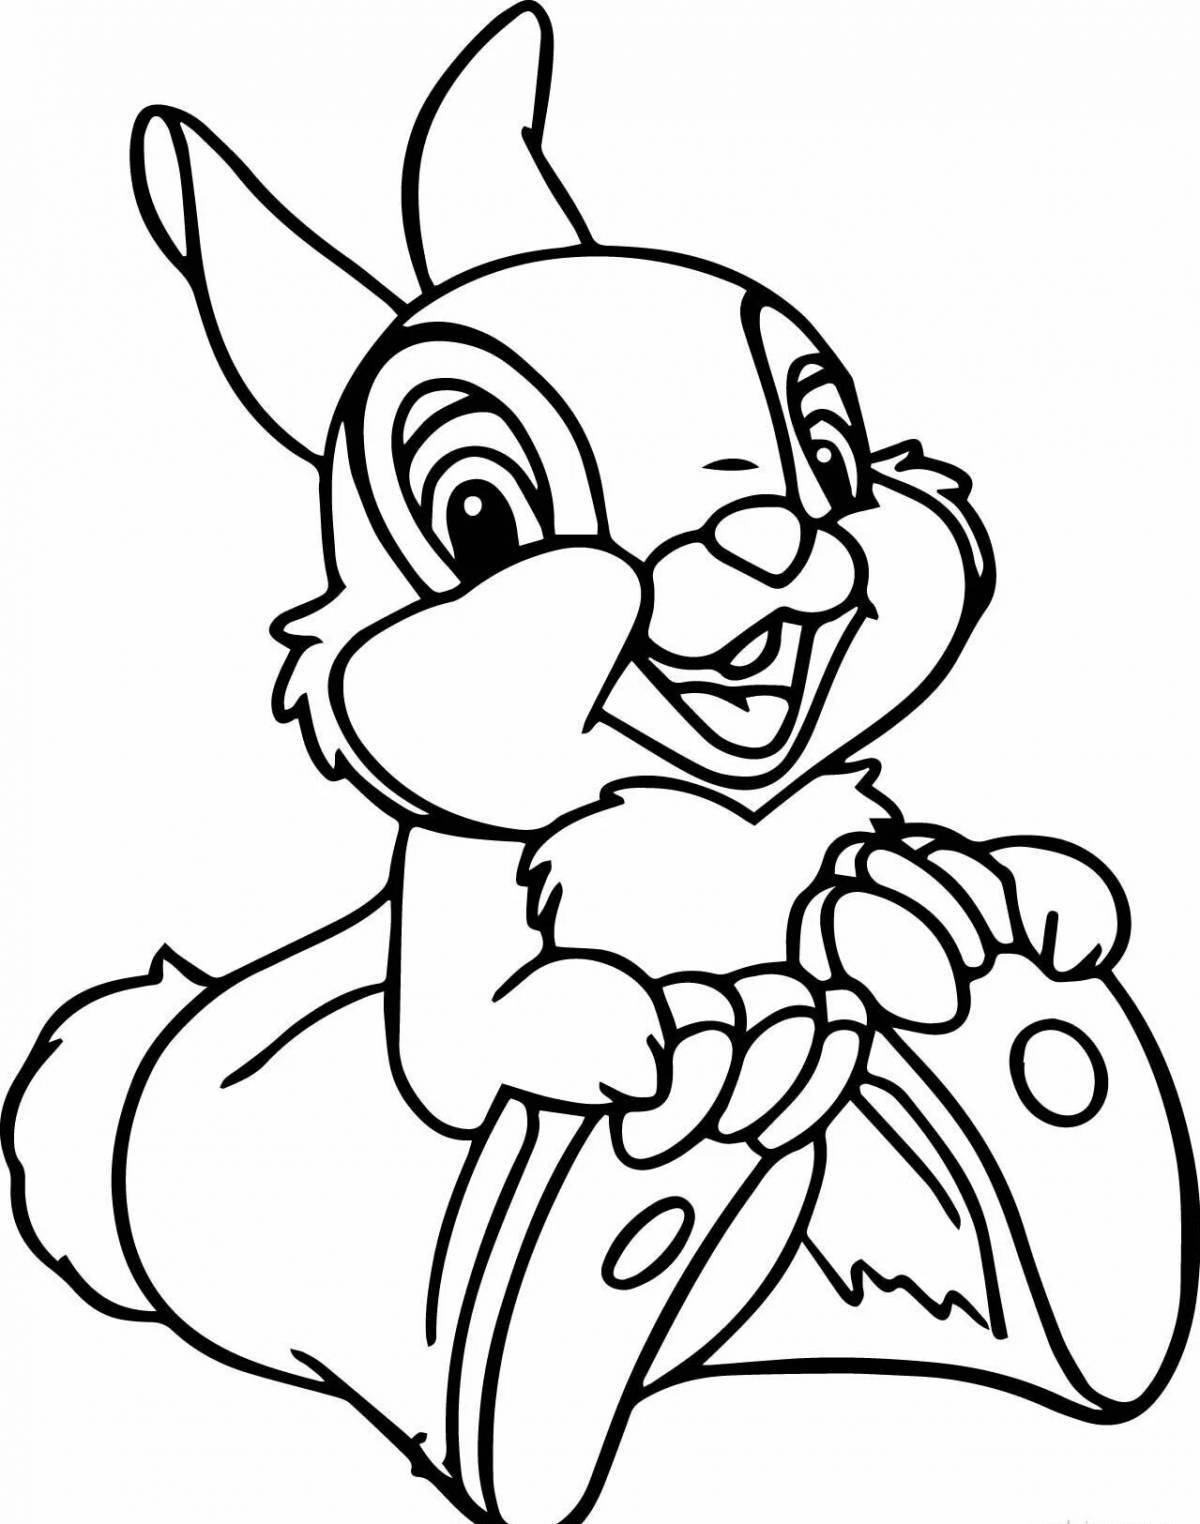 Coloring page adorable hare